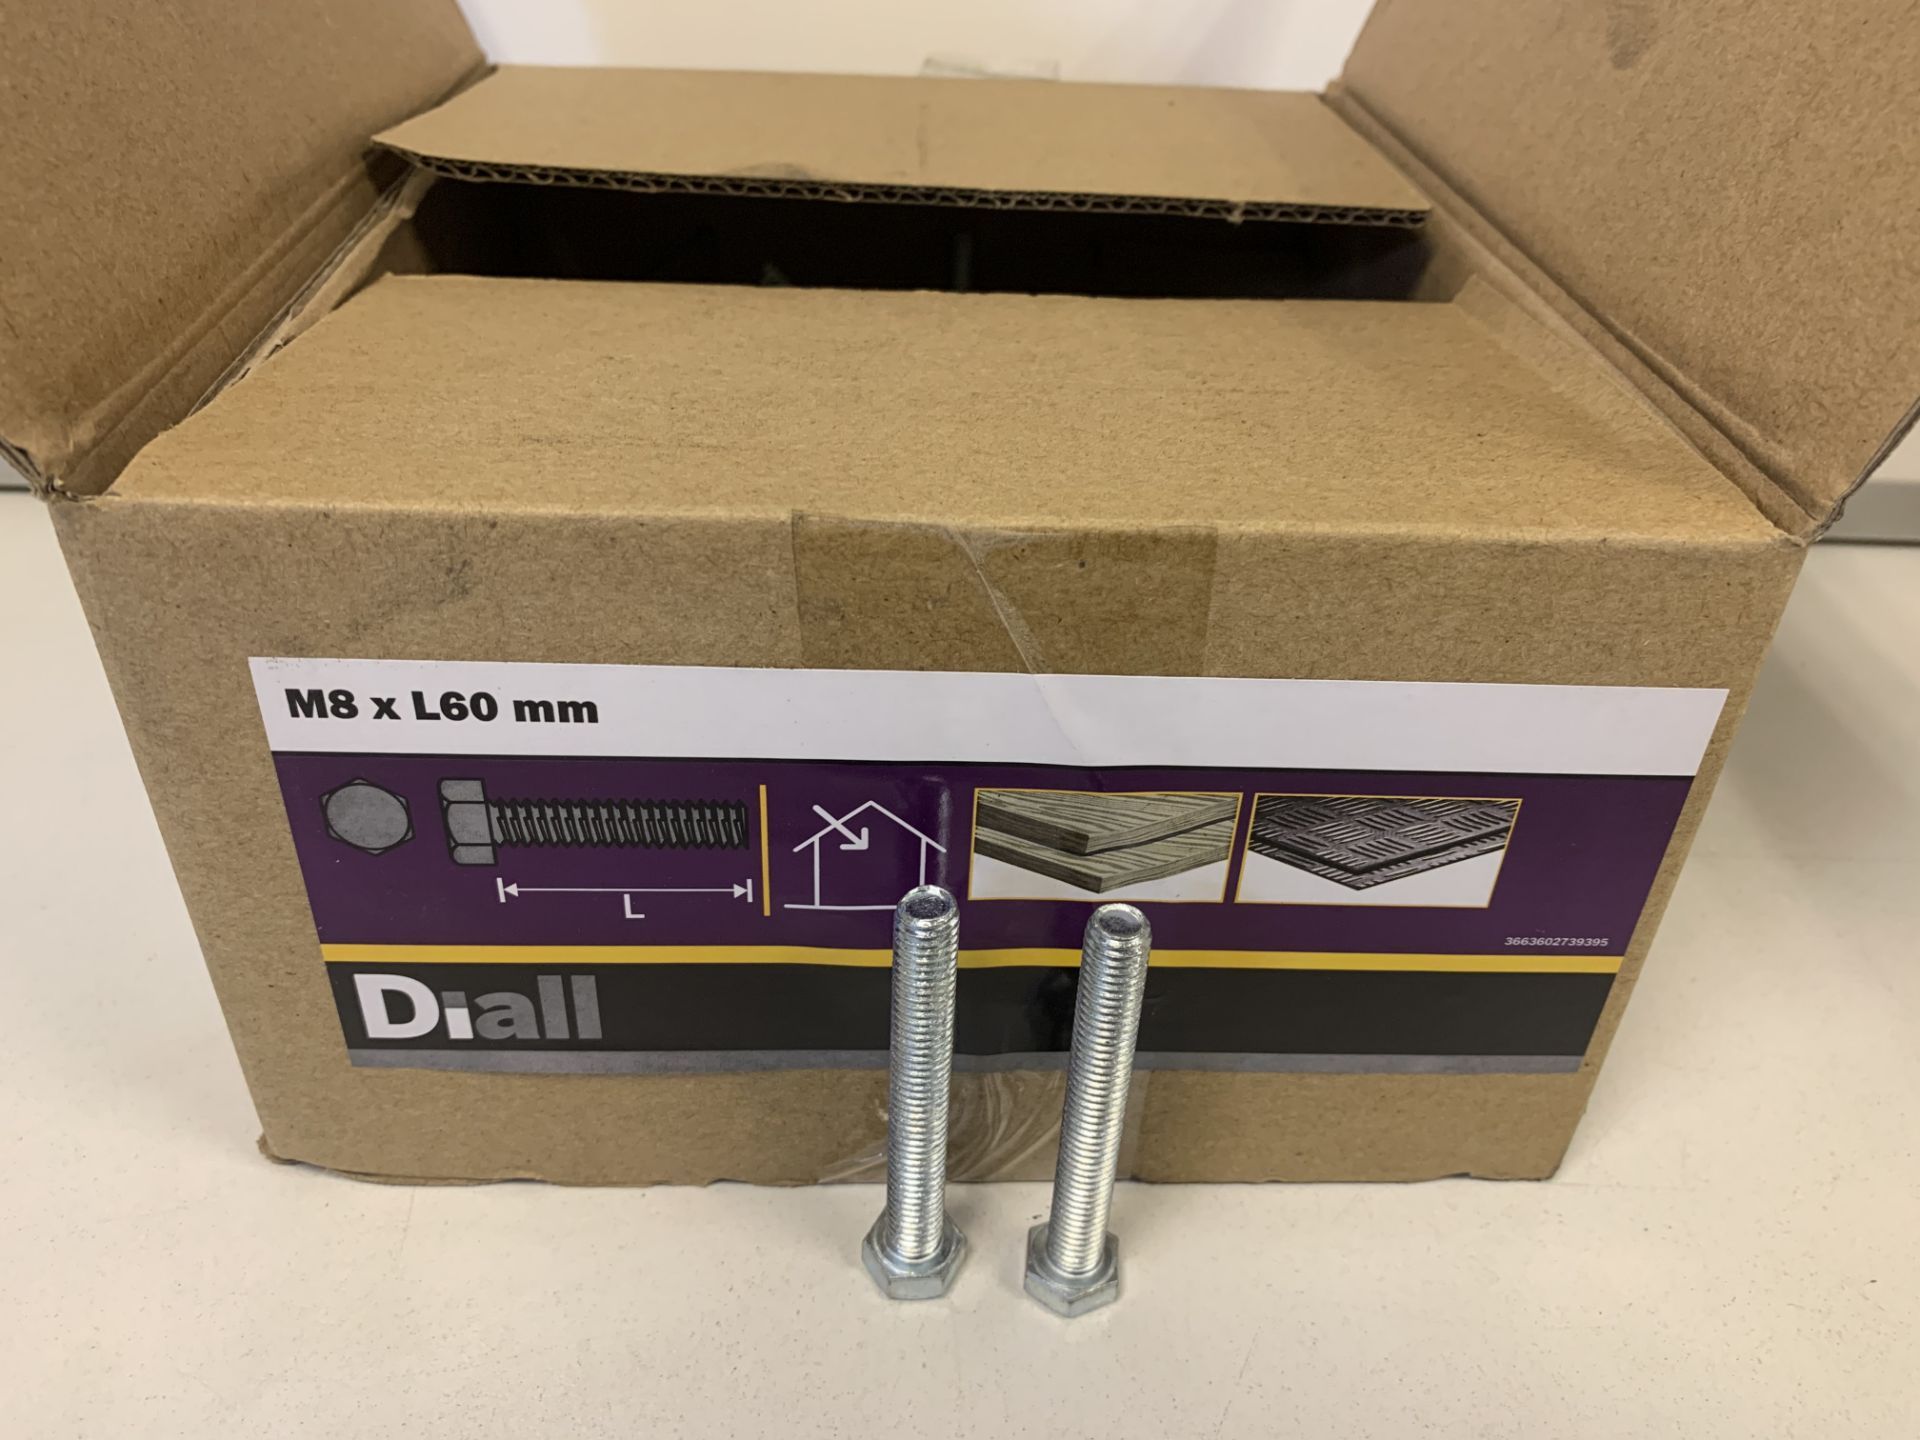 12 X BRAND NEW BOXES OF DIALL M8 X 60MM HEX BOLTS 4KG BOX (959/16)